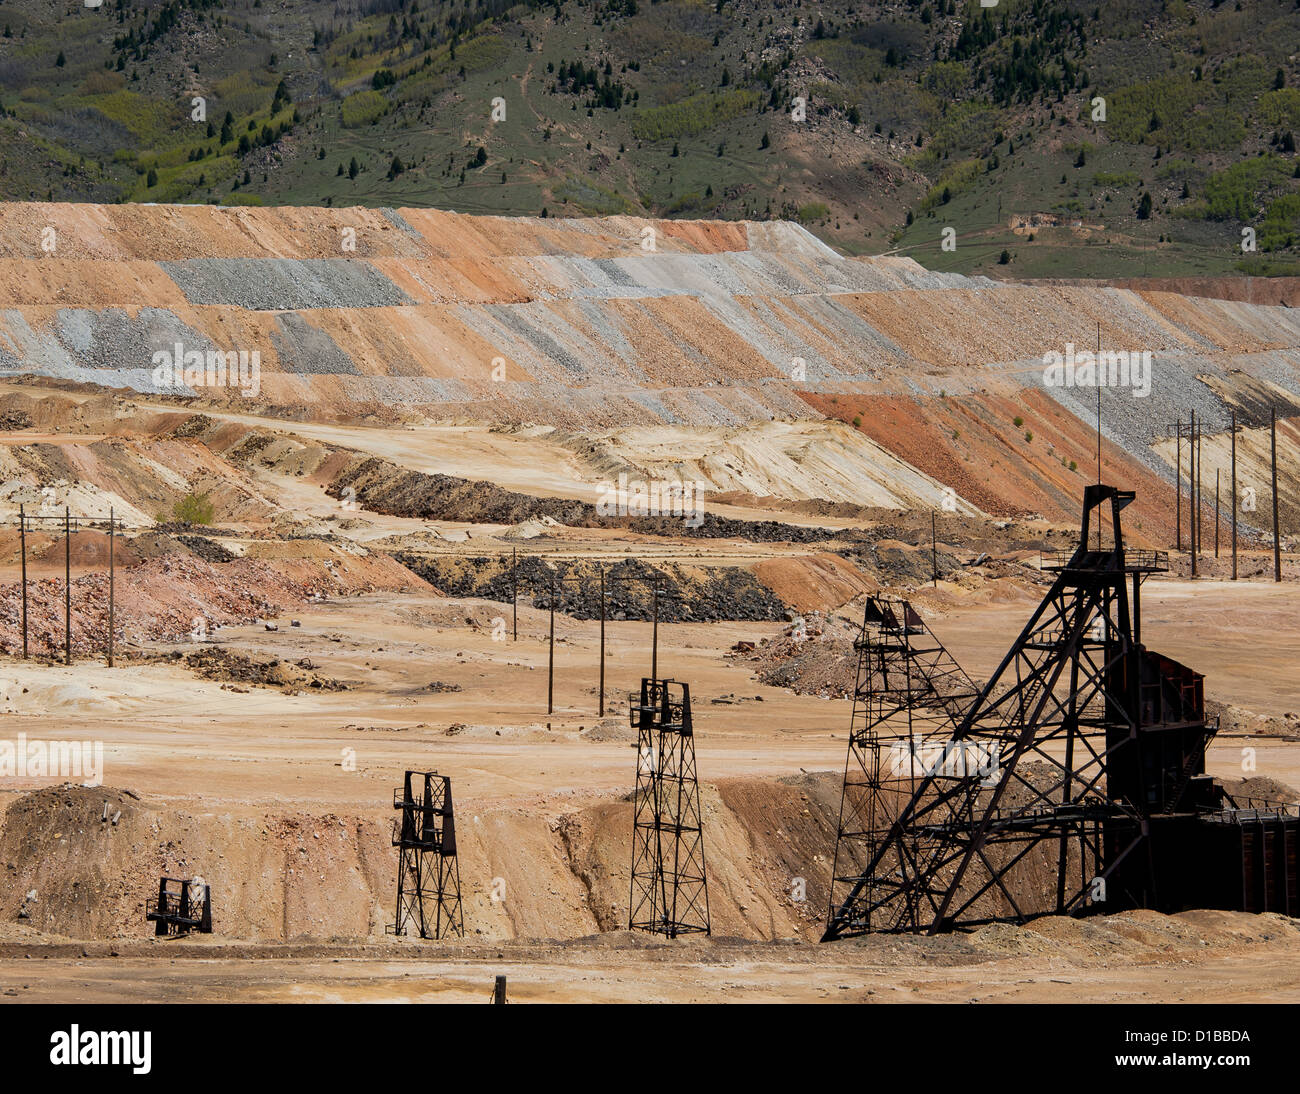 Contamination from mining in Butte, Montana.  The mining was hard core drilling and open pit mining. Stock Photo